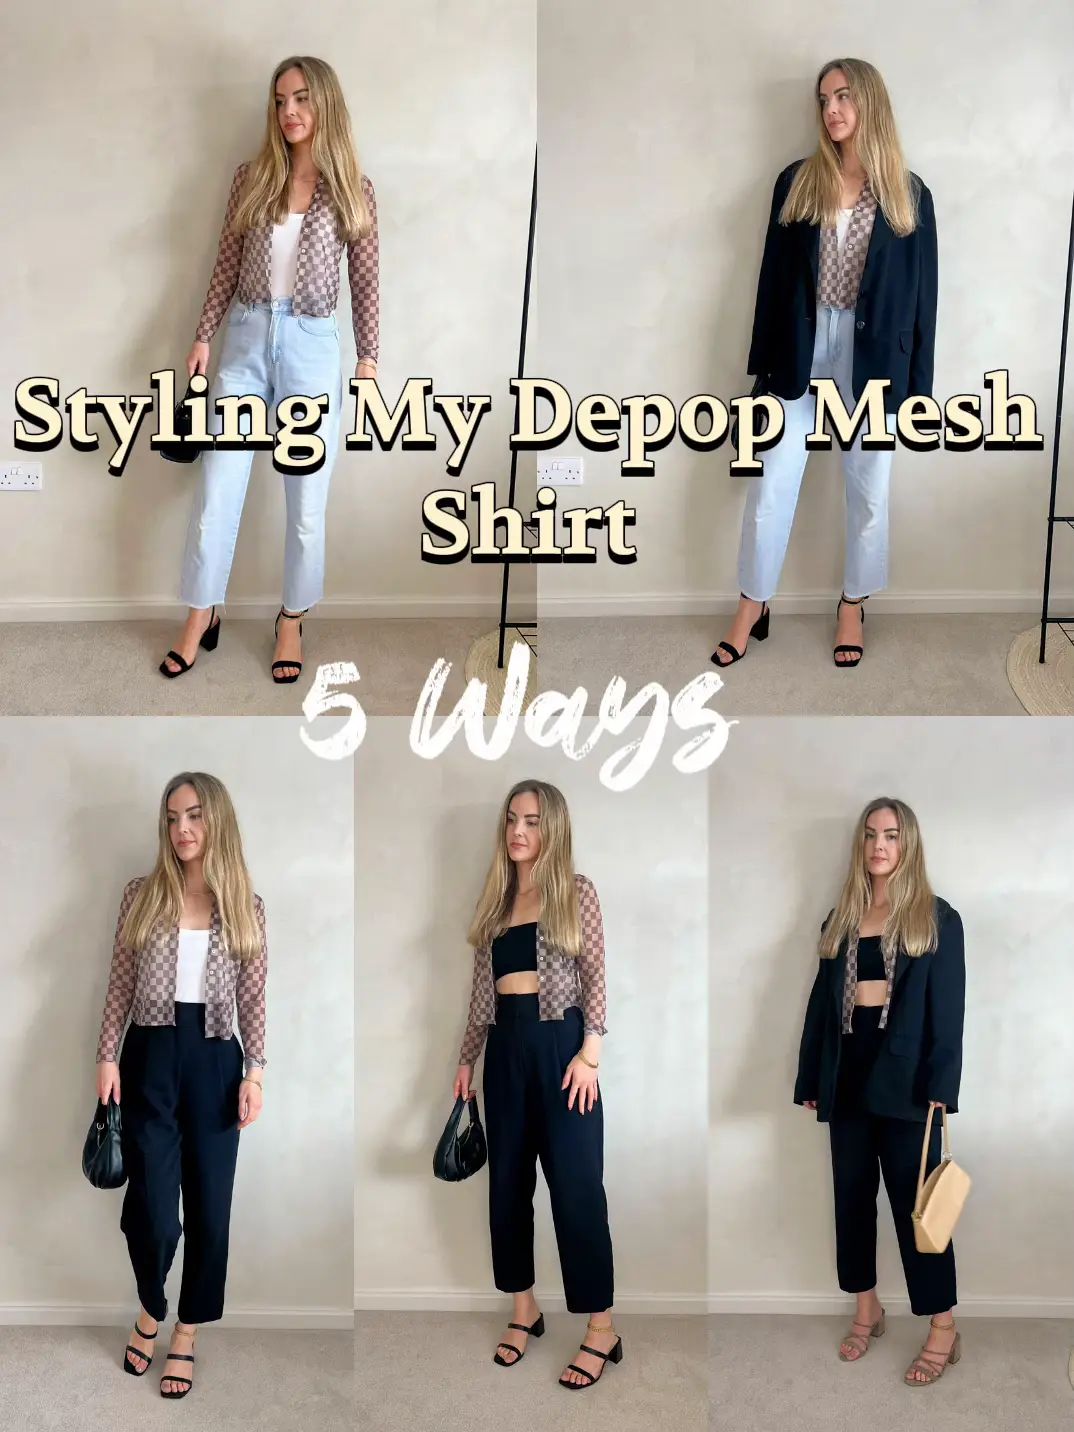 what to wear with mesh top - Lemon8 Search